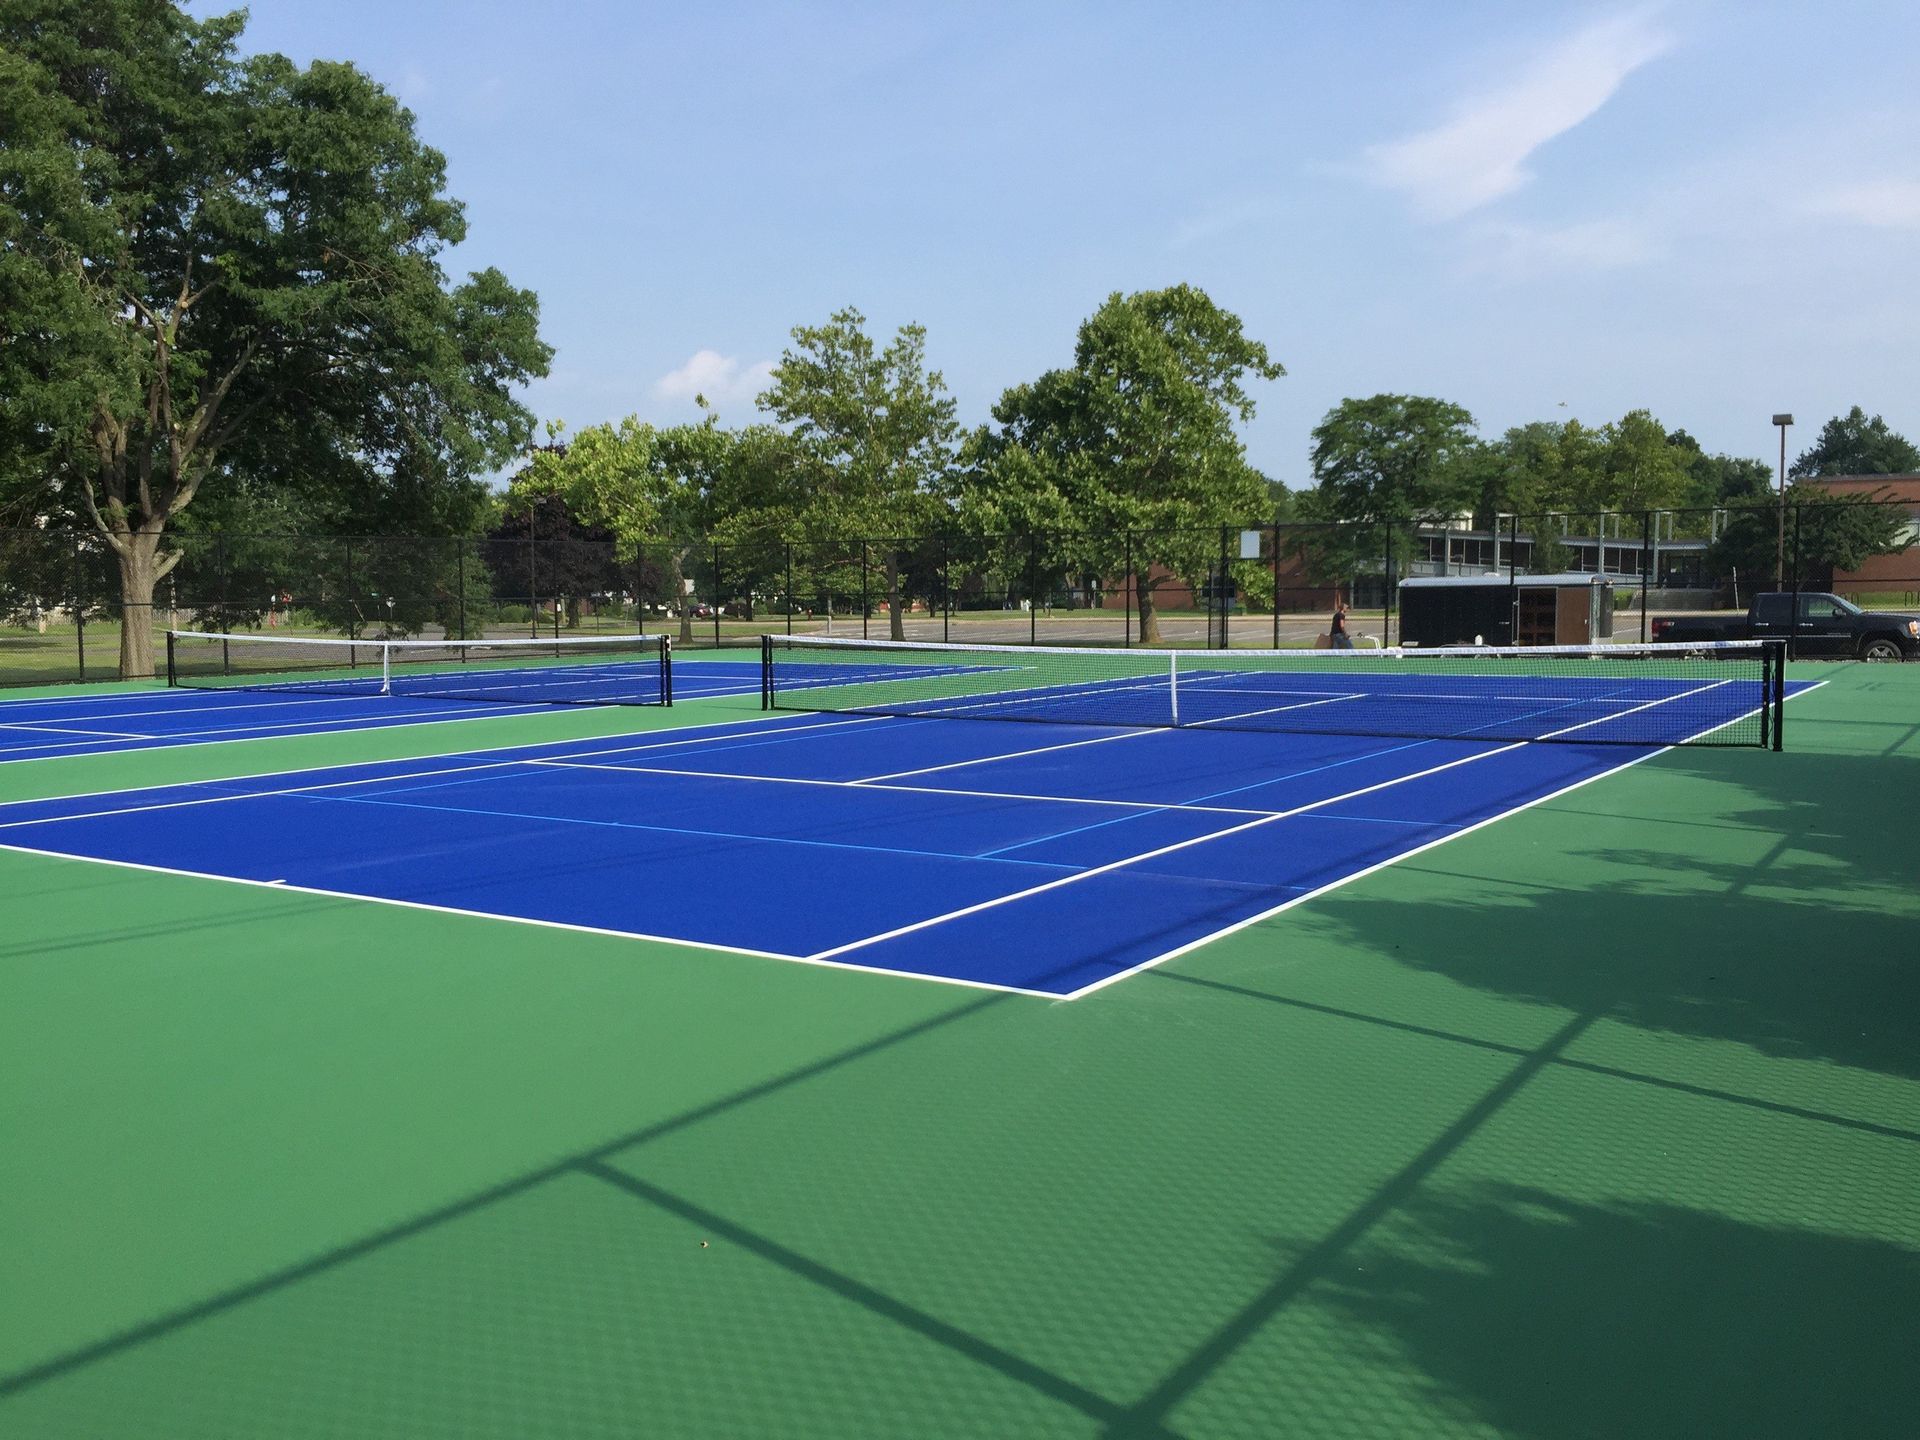 Tennis Court Contractor in Long Island, NY